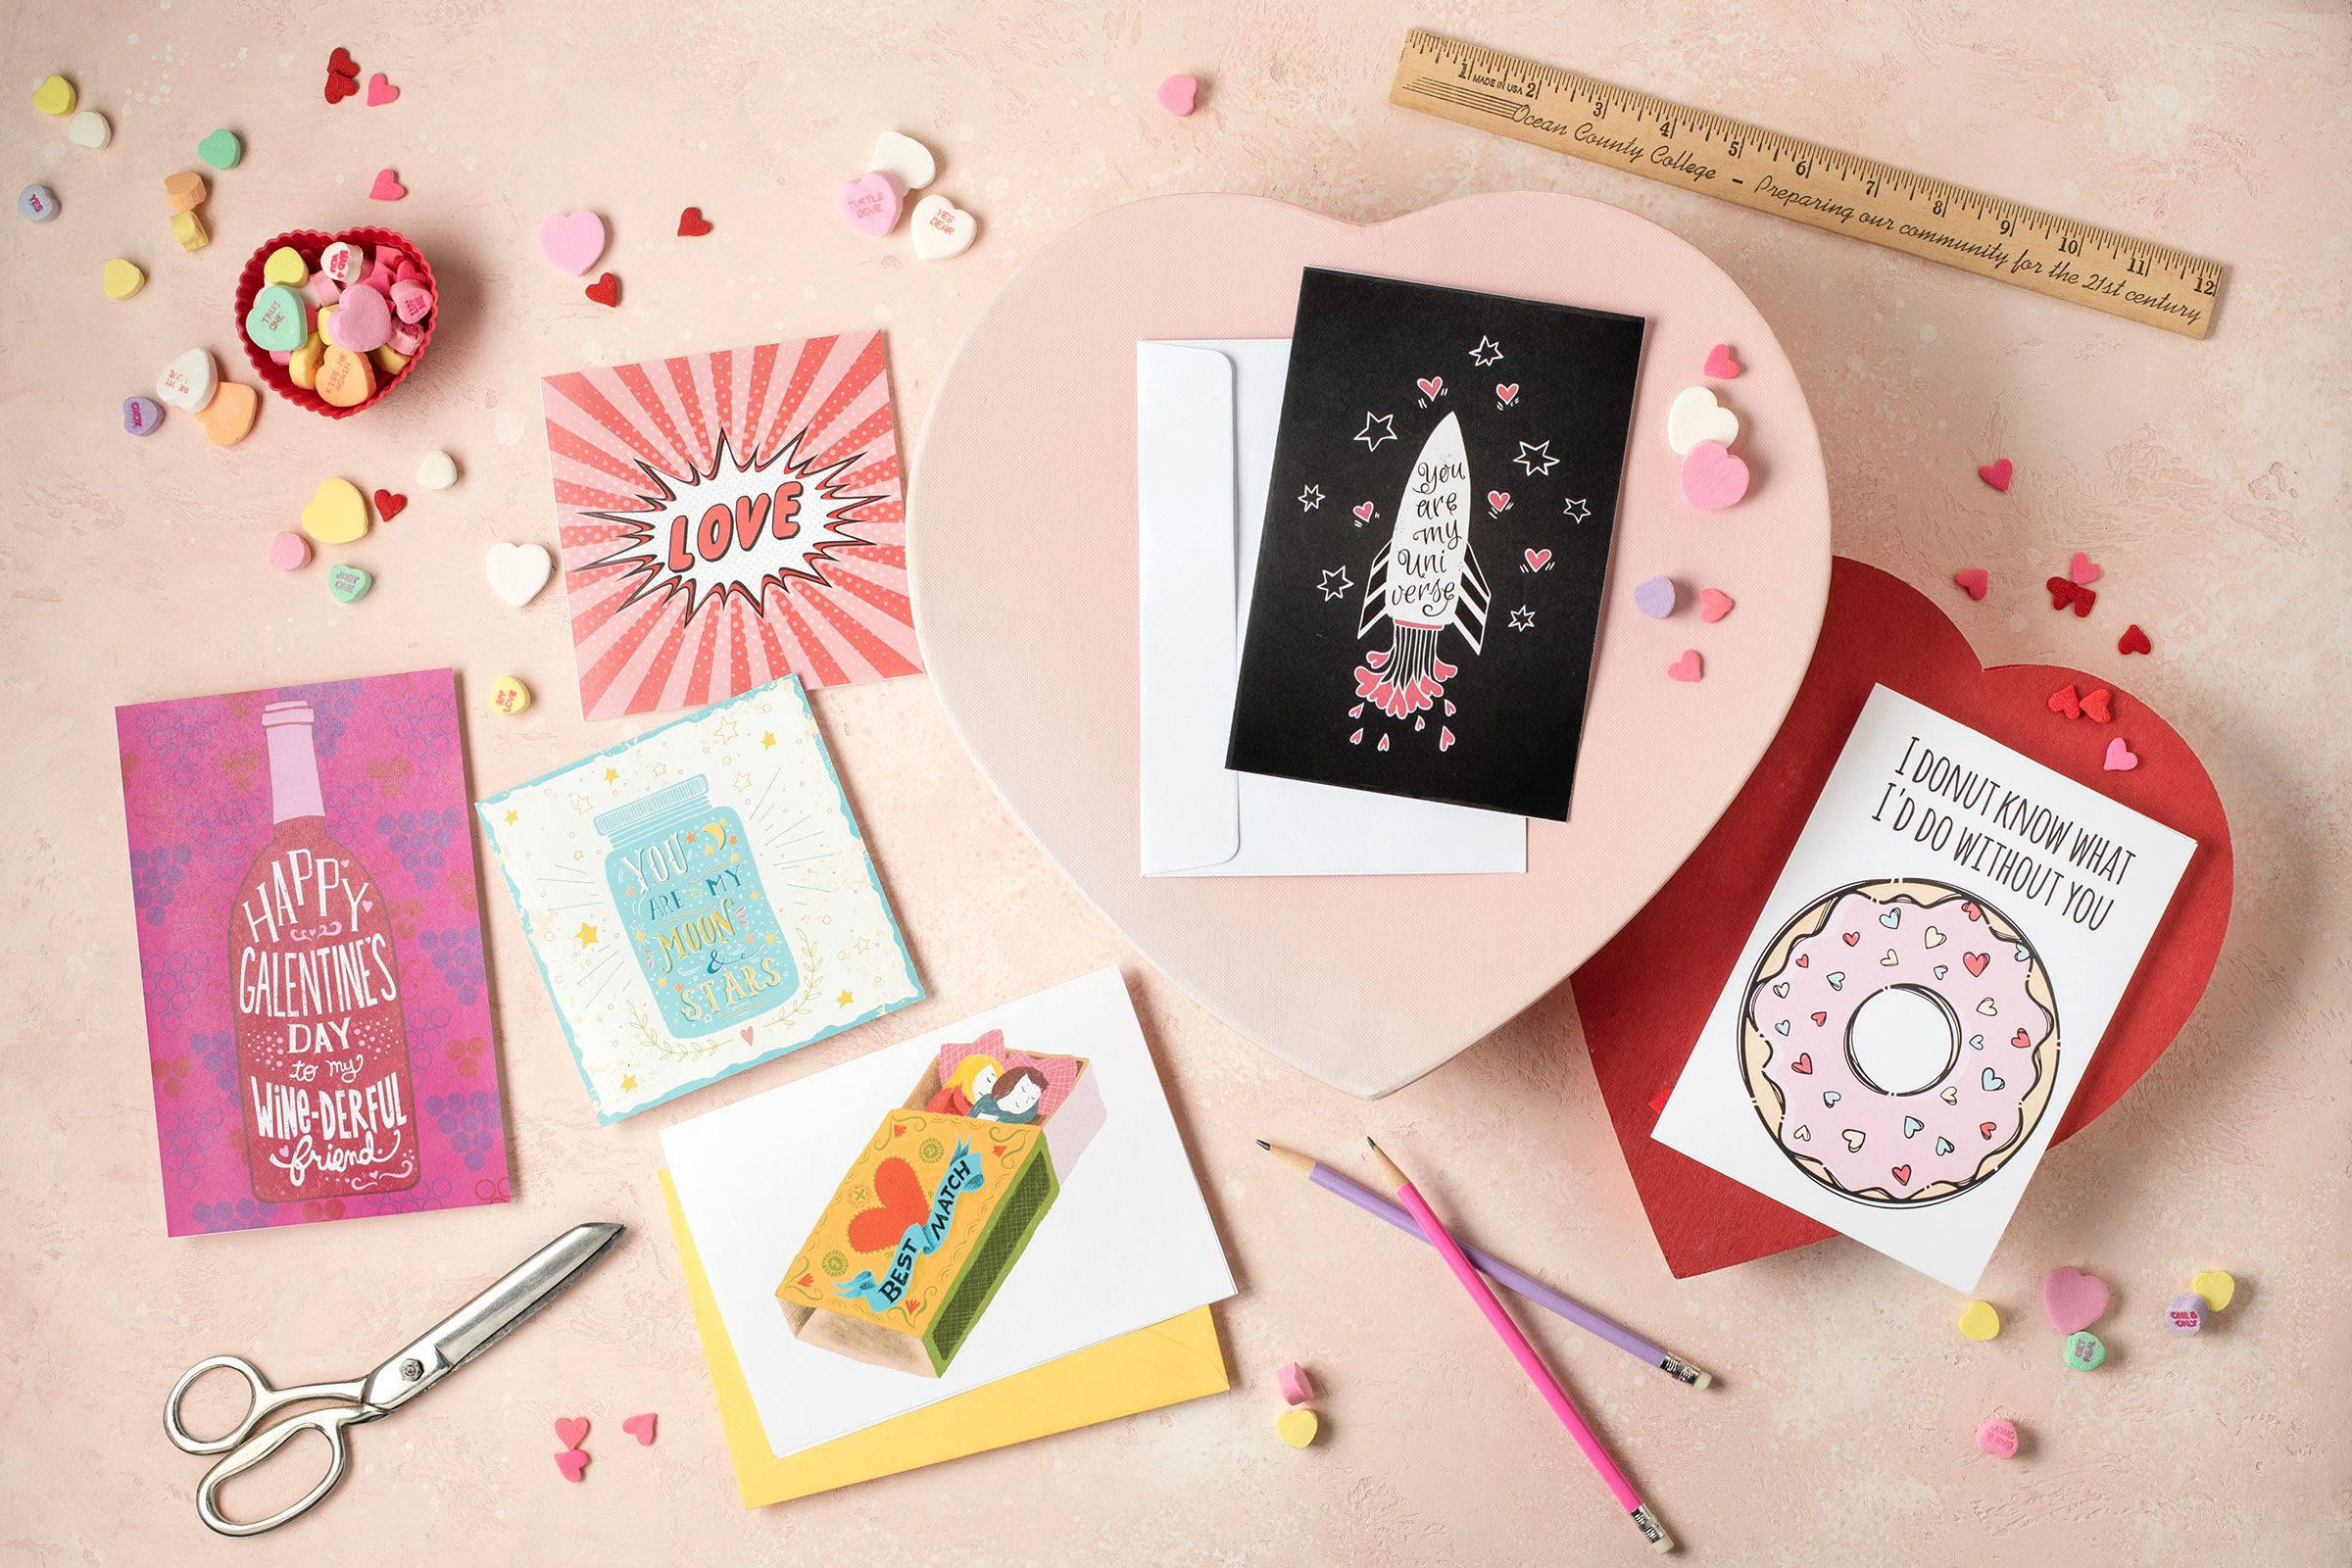 19 Free Printable Valentine Cards That Will Make Your Loved Ones Smile